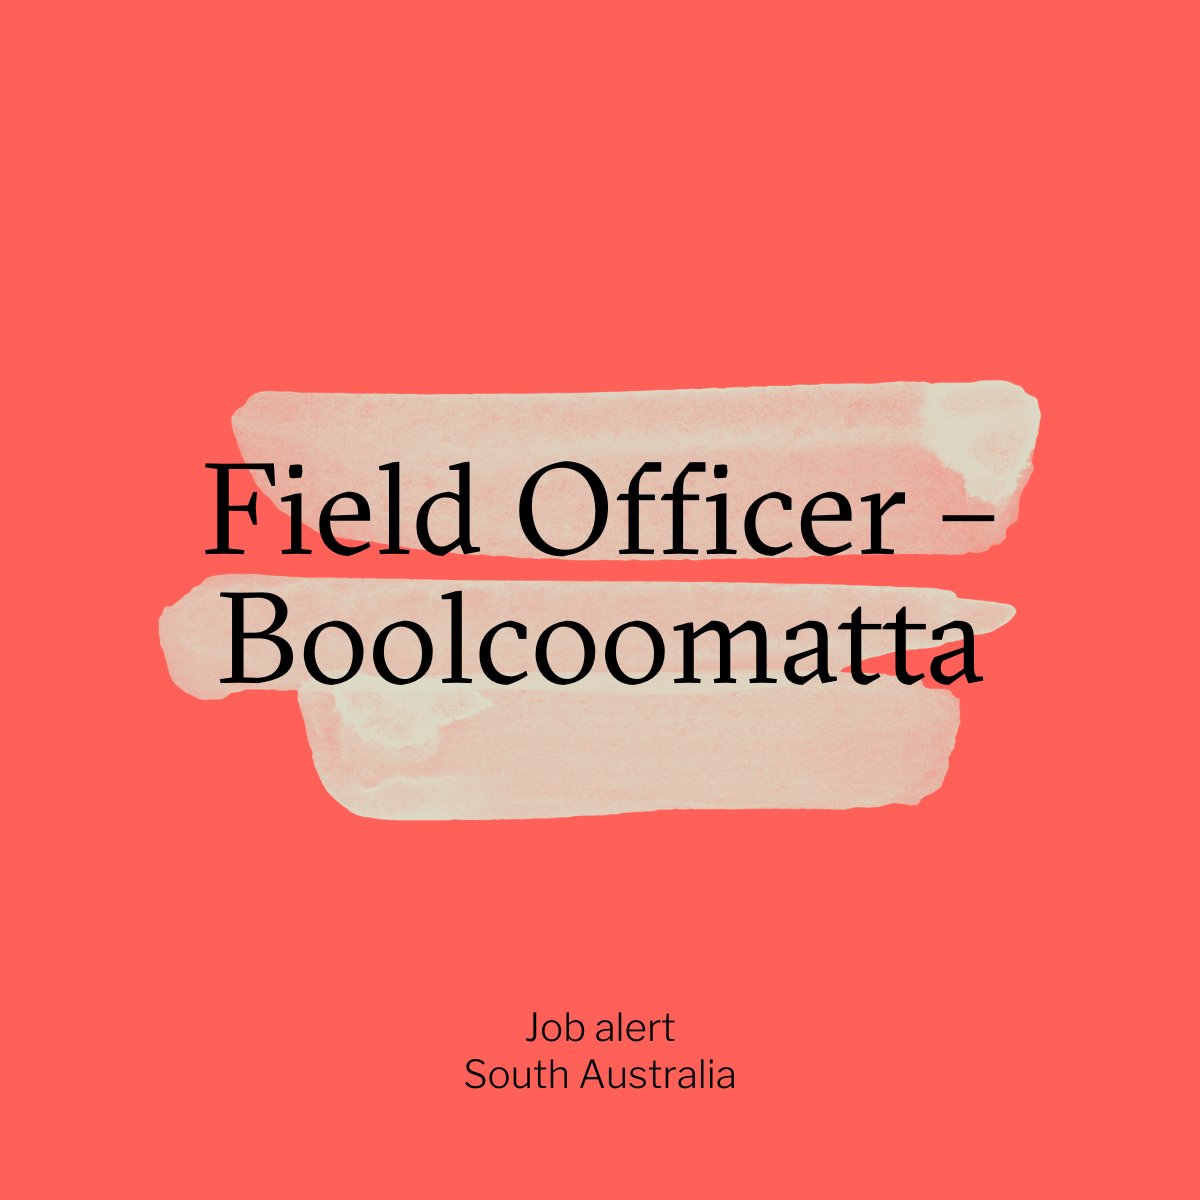 JOB ALERT 🌿💼 If you drive an hour west of Broken Hill, past the backdrop of Mad Max II, you'll reach Boolcoomatta Station Reserve. This property has got to be one of the coolest work environments in Australia AND there's a job opening. Check it out 👉 applynow.net.au/jobs/FOB2024